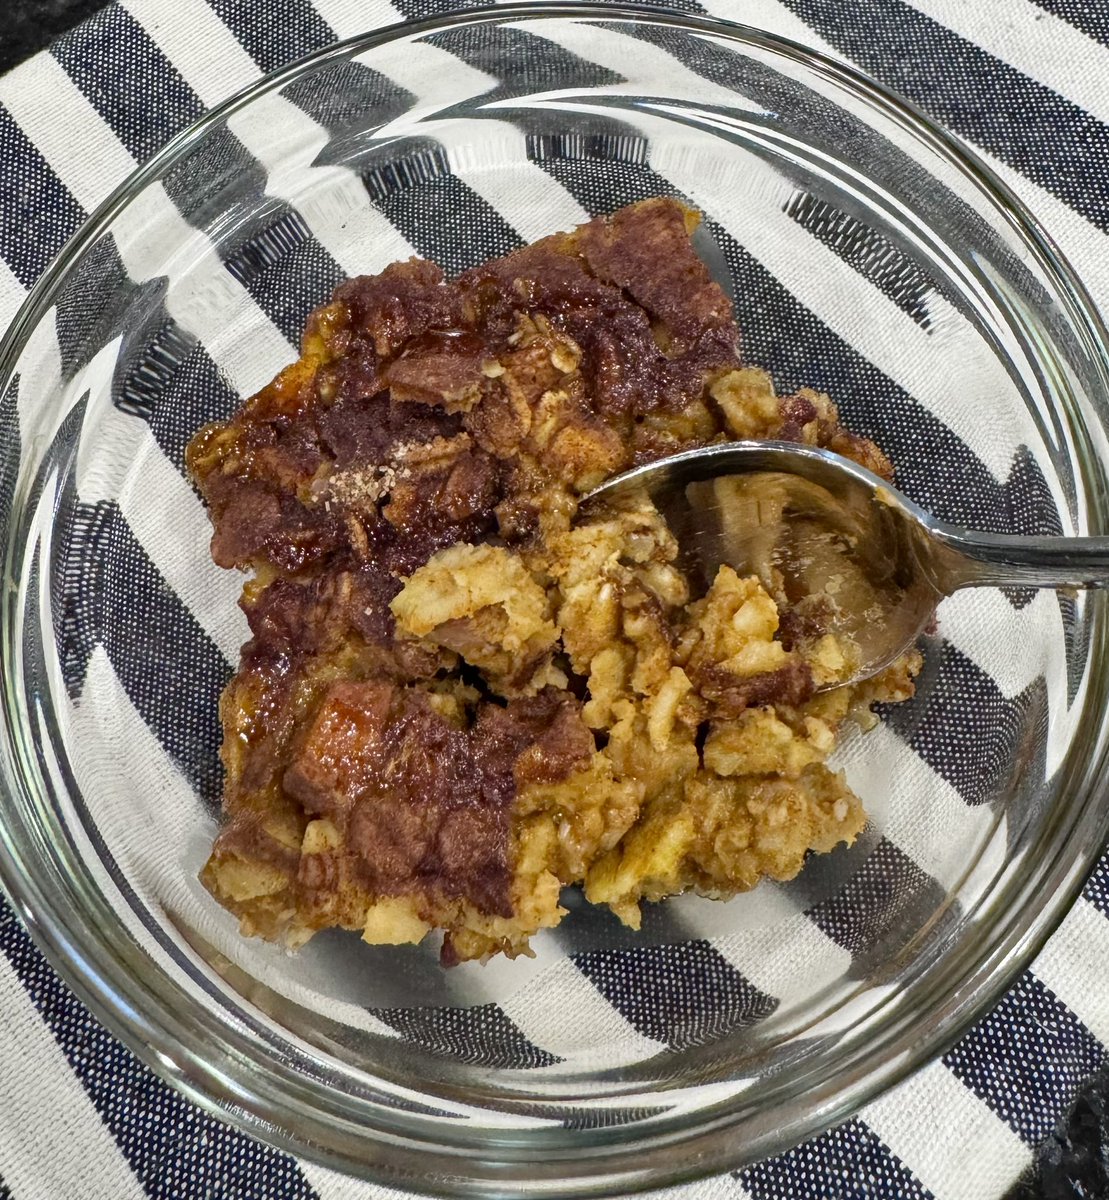 Pumpkin Apple Baked Oatmeal has all the flavors of Fall! Click over to my blog for a link to the recipe. 
#creatingme #recipe #bakedoatmeal #bakedoatsrecipe #fallrecipes #pumpkinrecipes #applerecipes

creatingme.net/2023/10/17/pum…